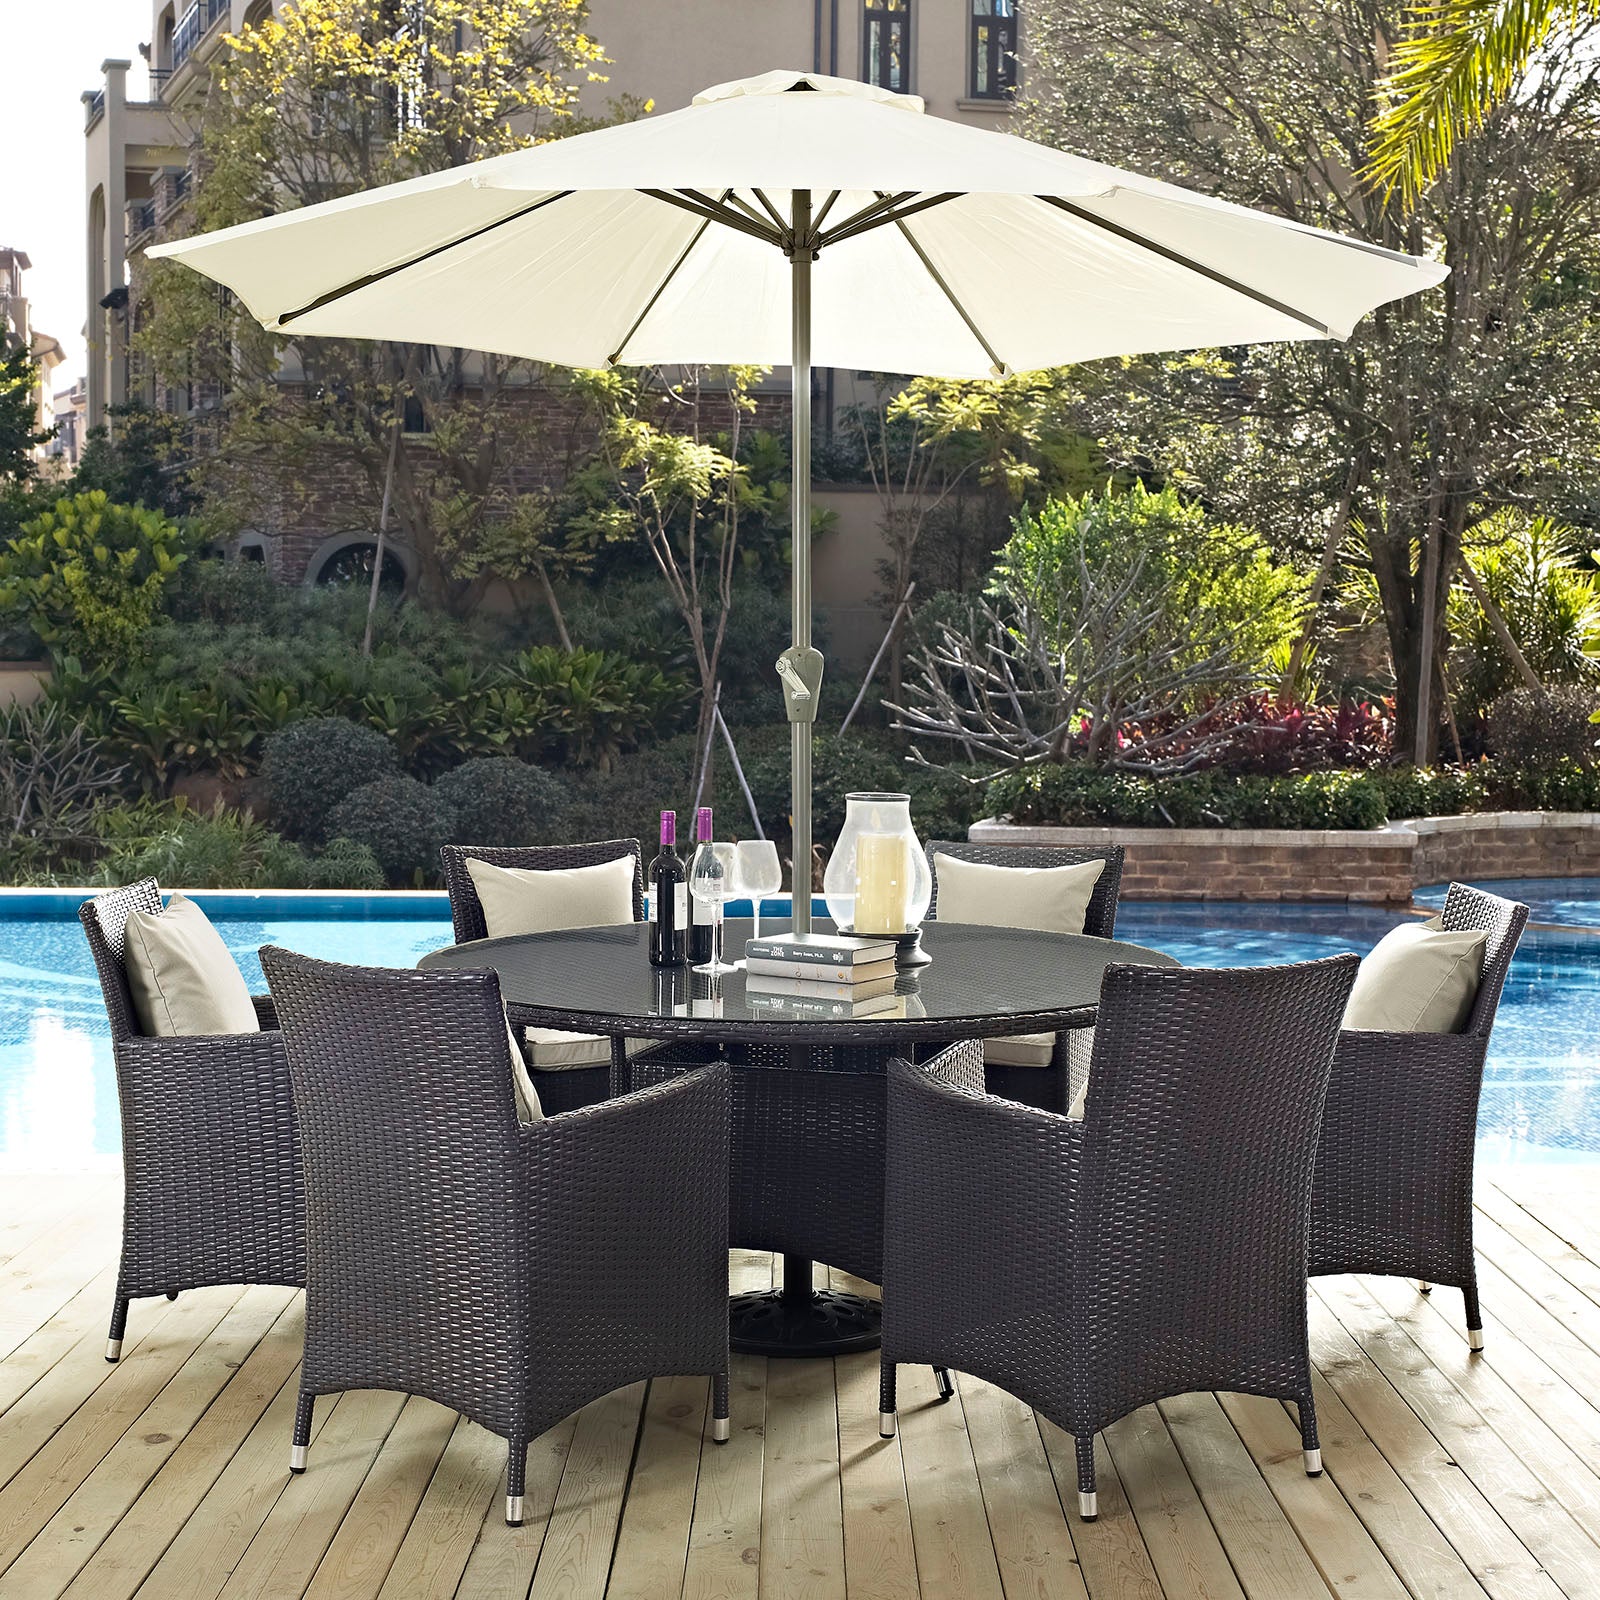 Convene 8 Piece Outdoor Patio Dining Set - East Shore Modern Home Furnishings